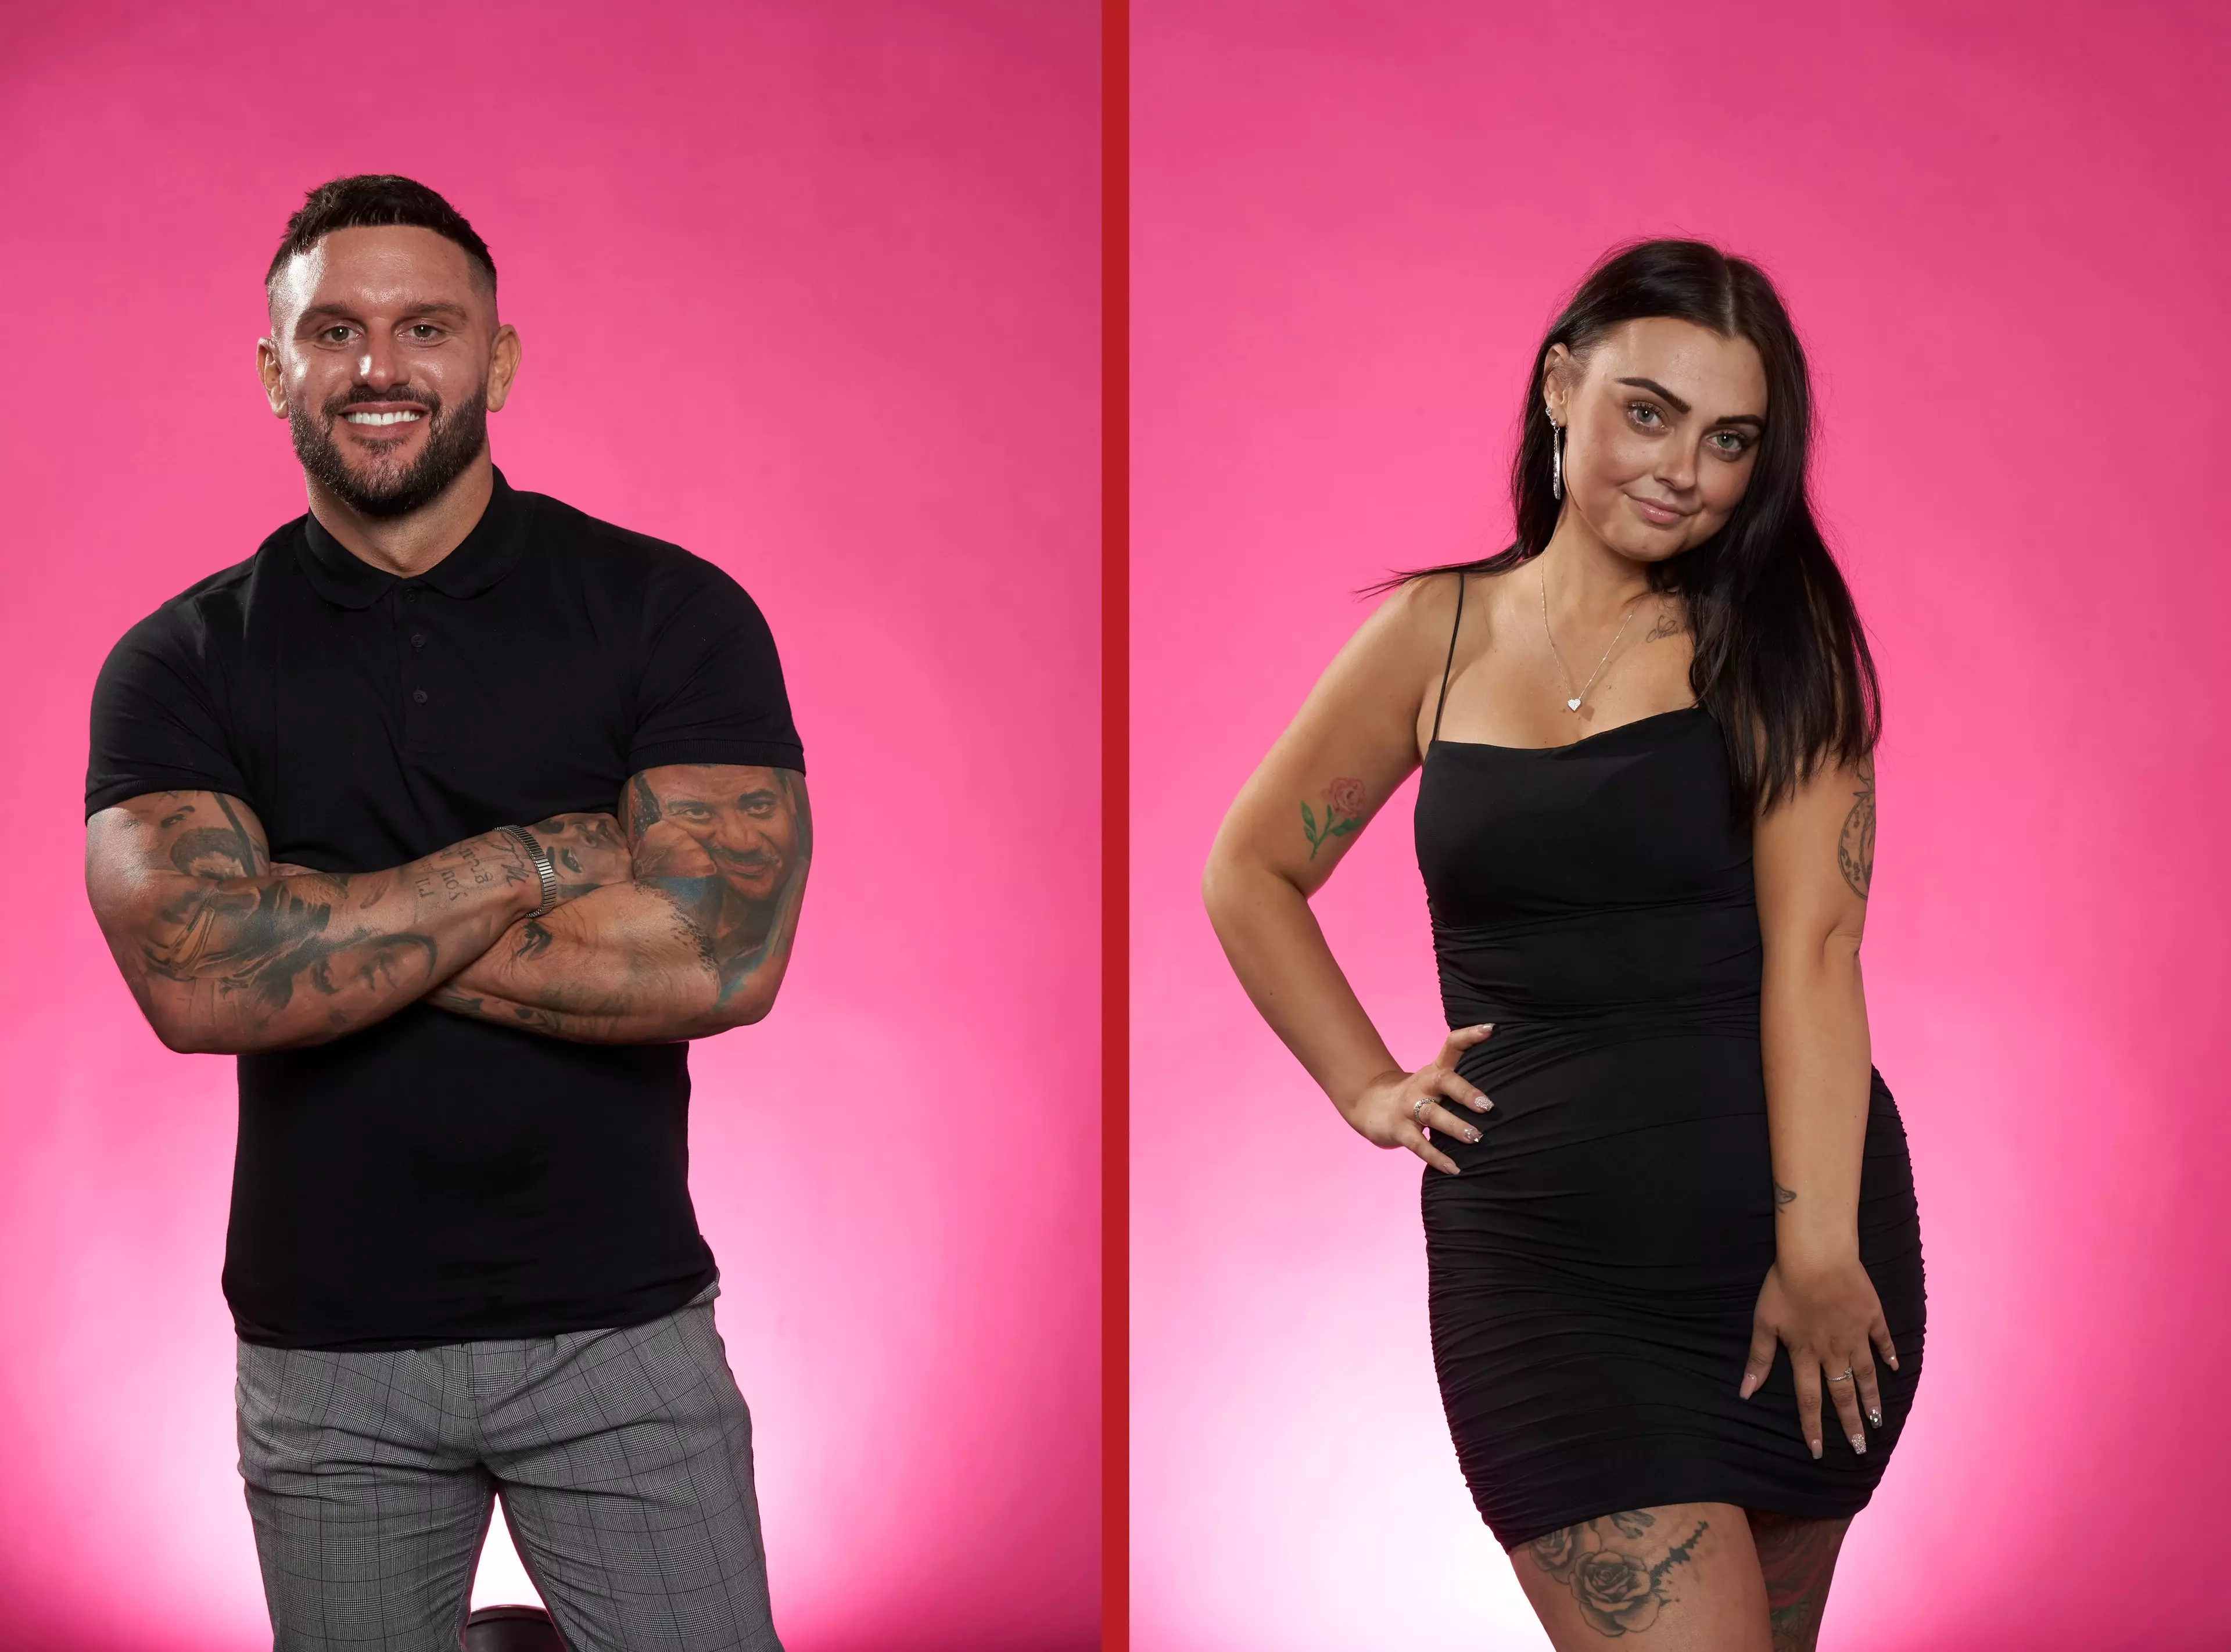 Danny will meet Lauren when he returns to First Dates on 2 February.